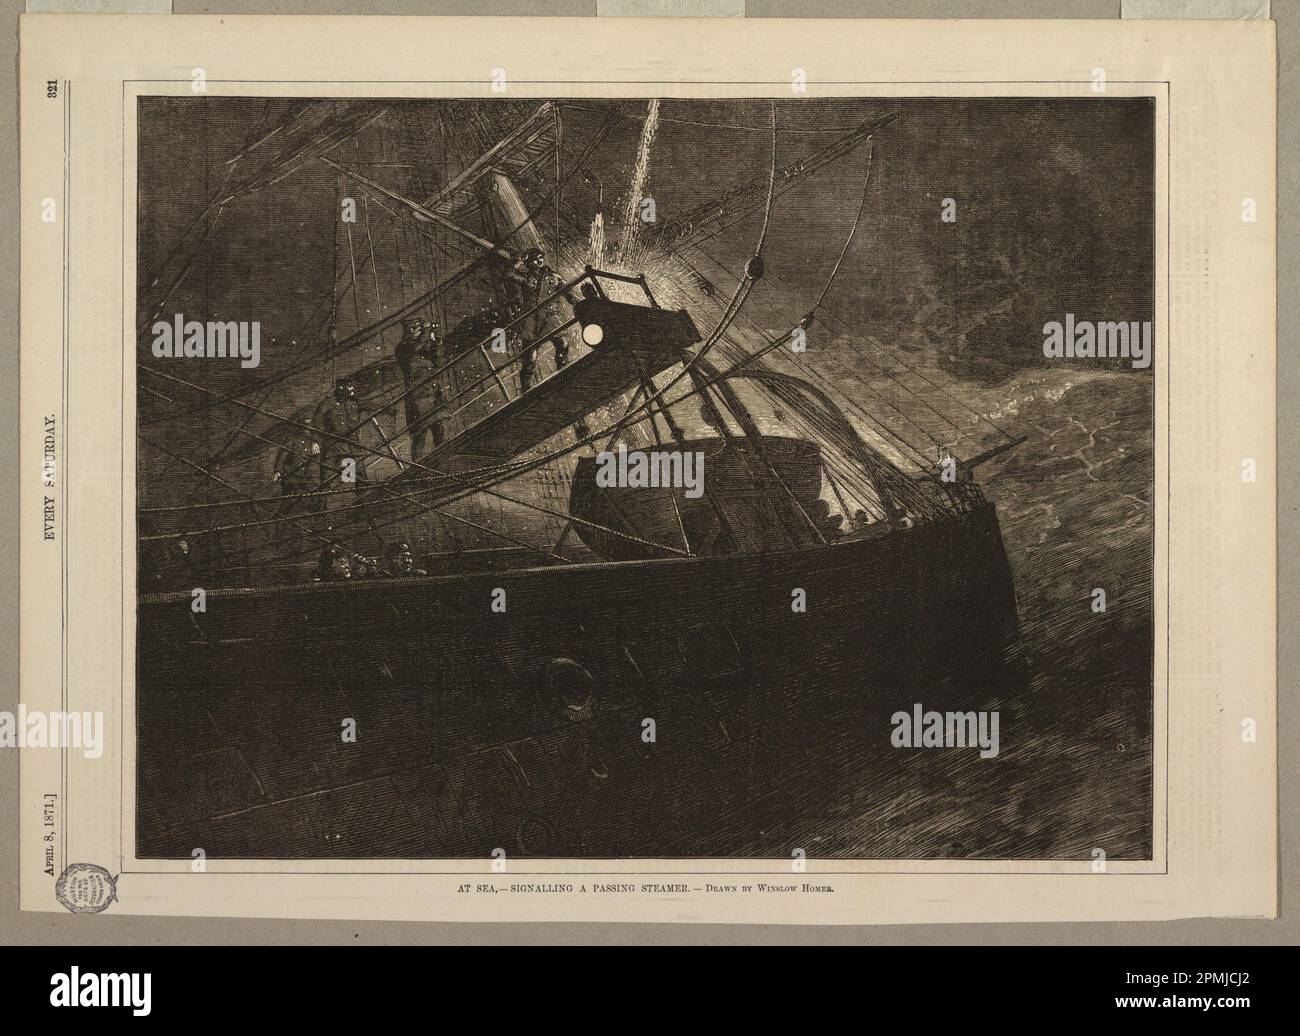 Print, At Sea, - signalling a passing Steamer; After Winslow Homer (American, 1836–1910); USA; wood engraving printed in black ink on paper ; 26.5 x 36.8 cm (10 7/16 x 14 1/2 in.) Stock Photo